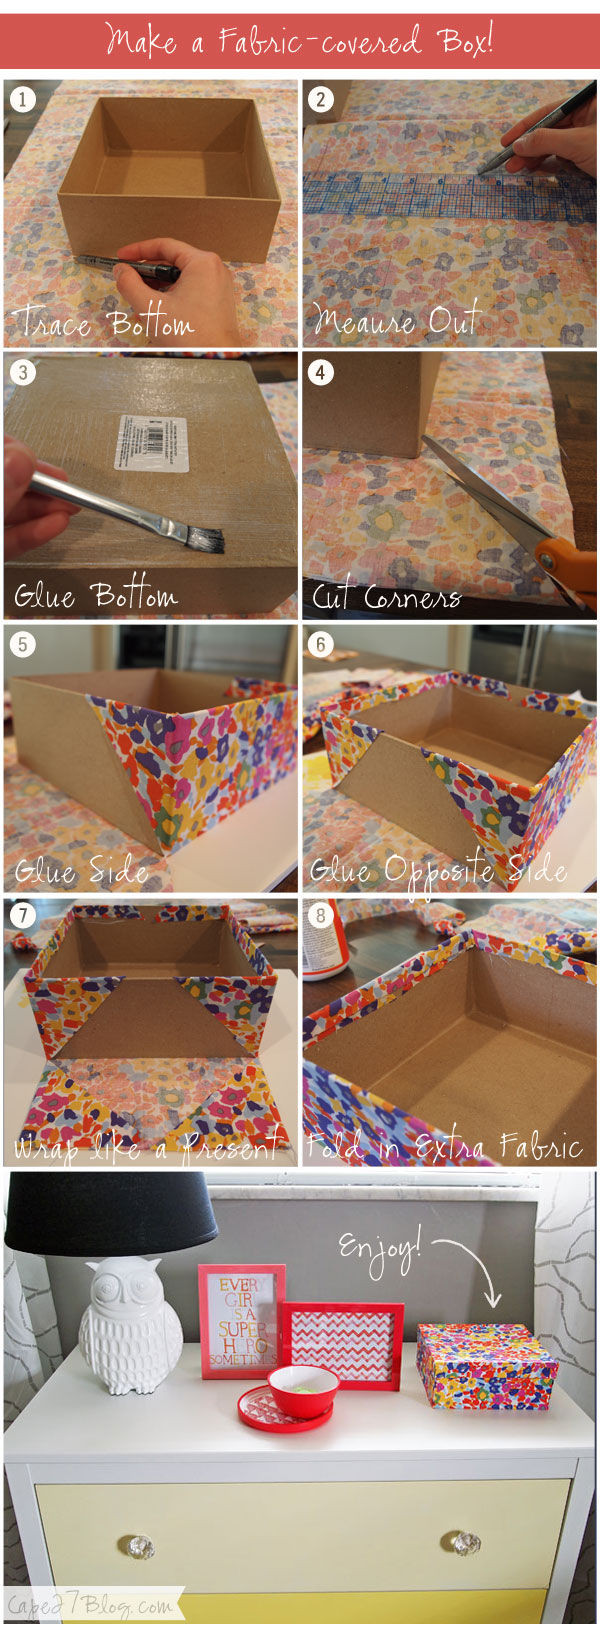 DIY Fabric Box
 DIY Fabric Covered Box s and for